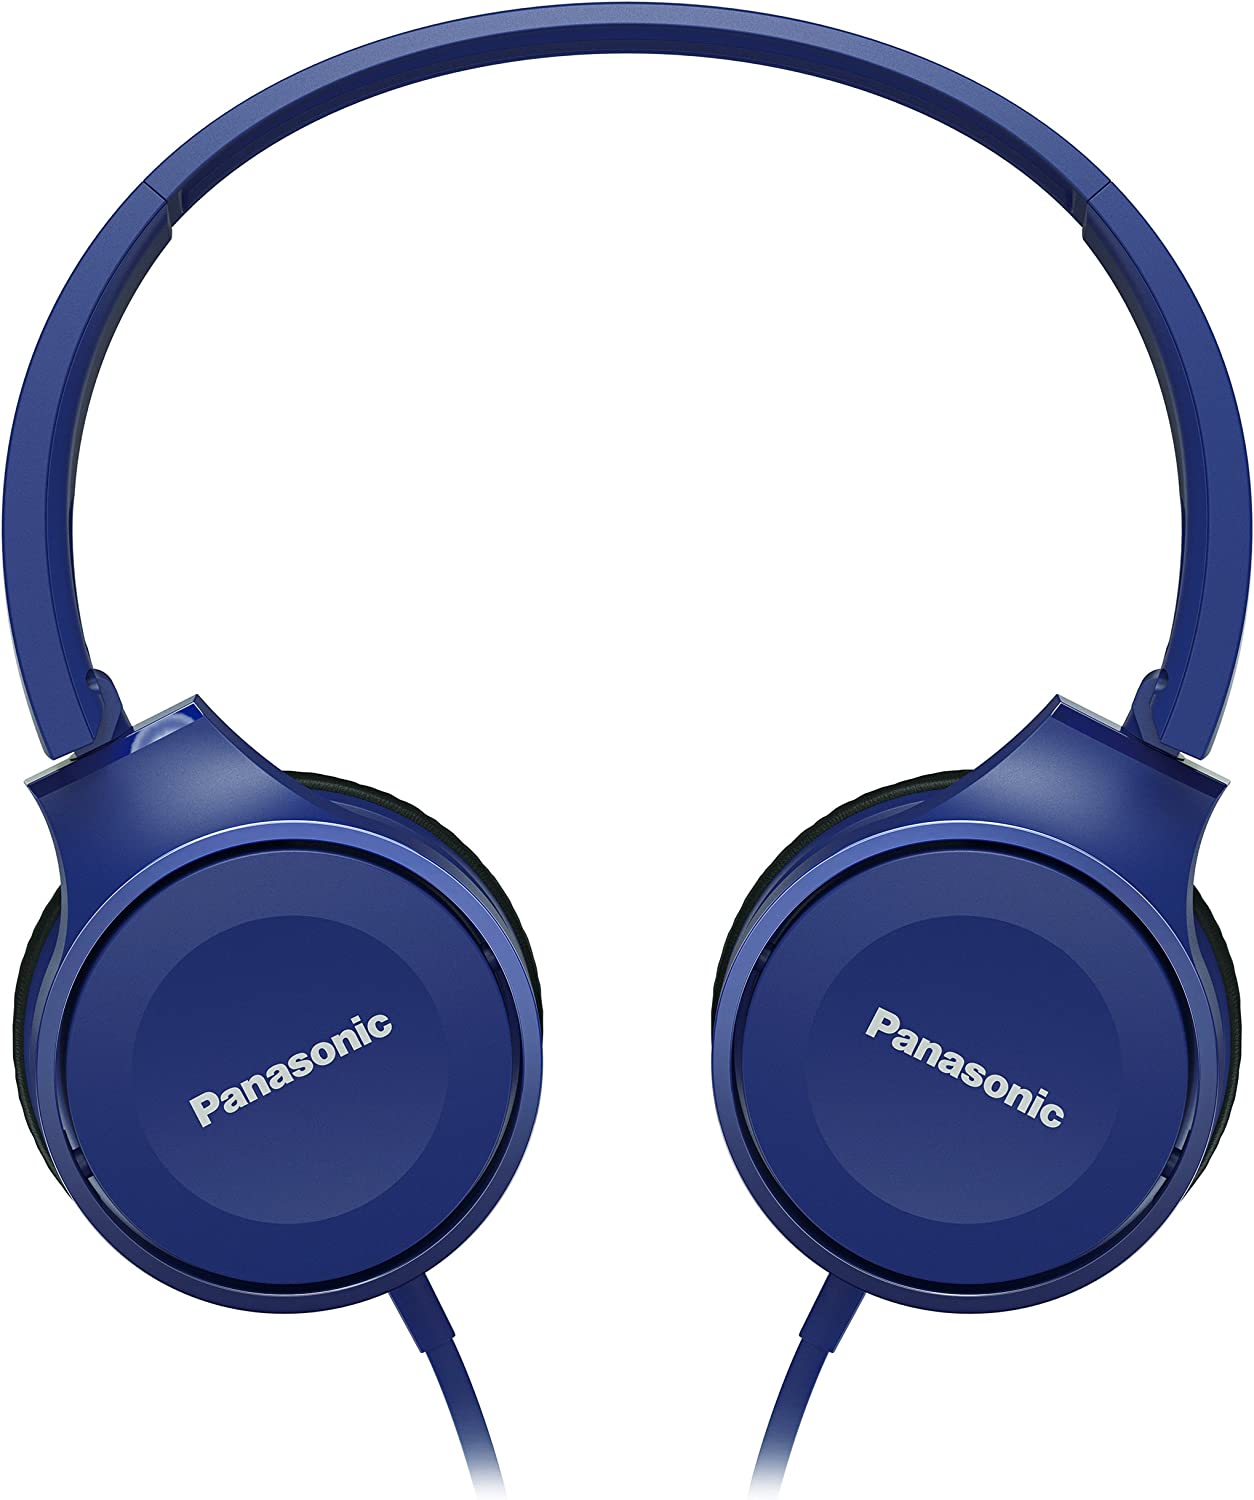 Gaming headset with microphone Panasonic RP-HF100ME-A Blue